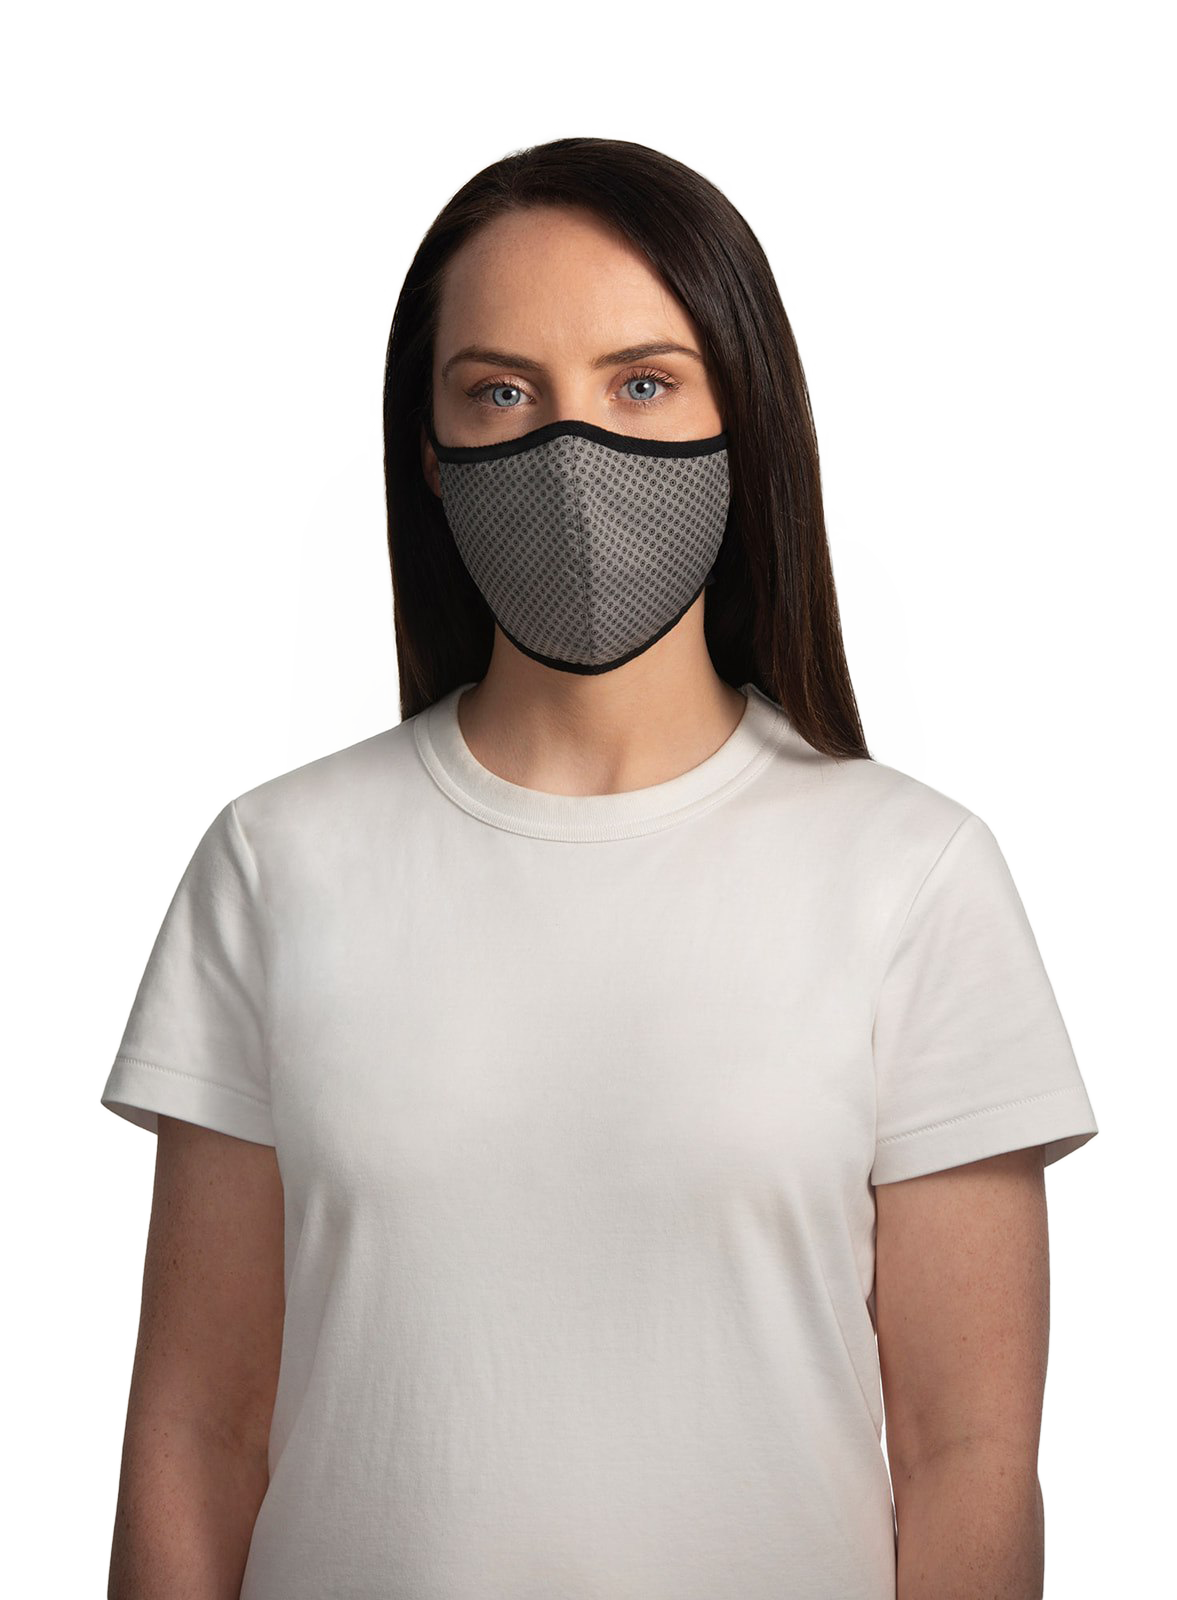 XWASTED female model wearing grey pattern recycled facemask